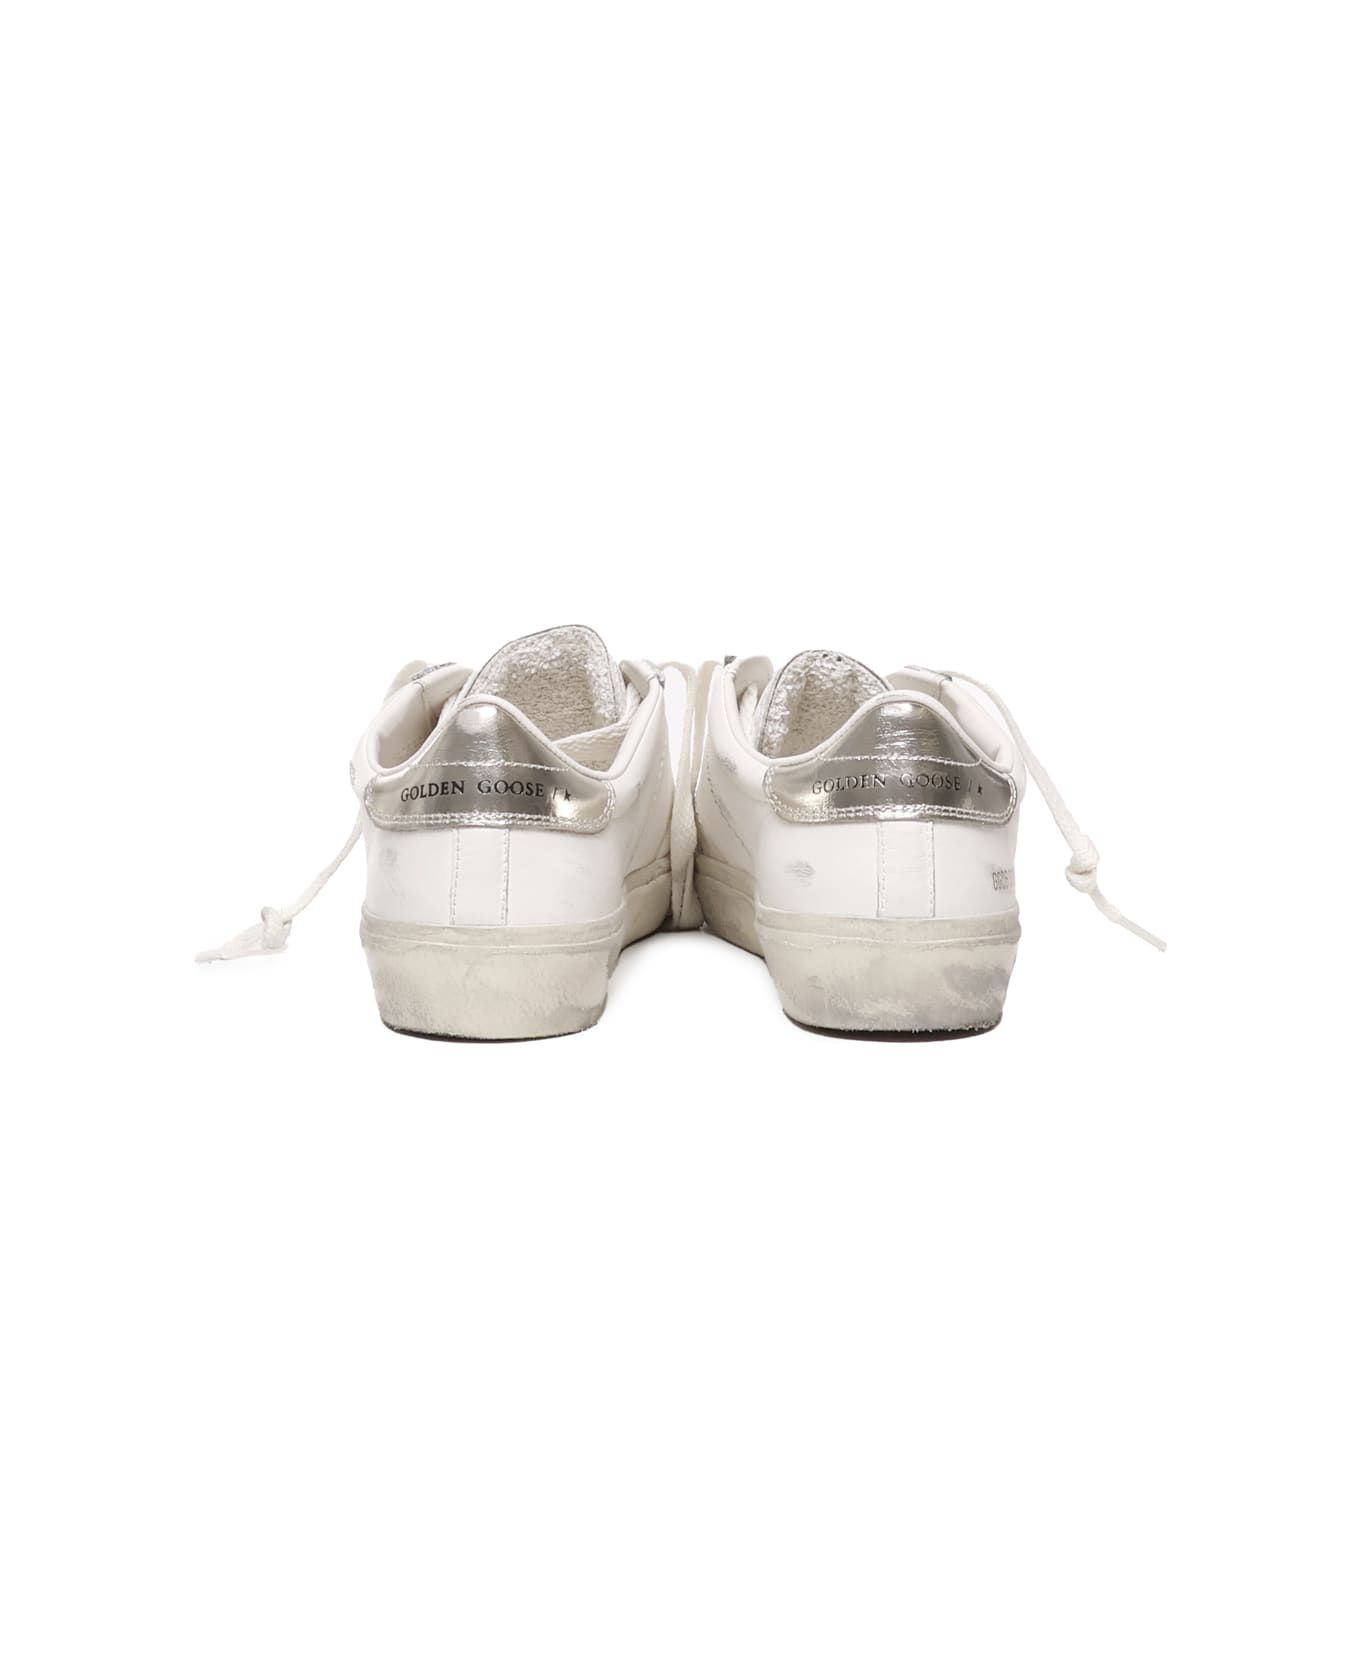 Golden Goose Soul Star Leather Sneakers - WHITE/GOLD スニーカー